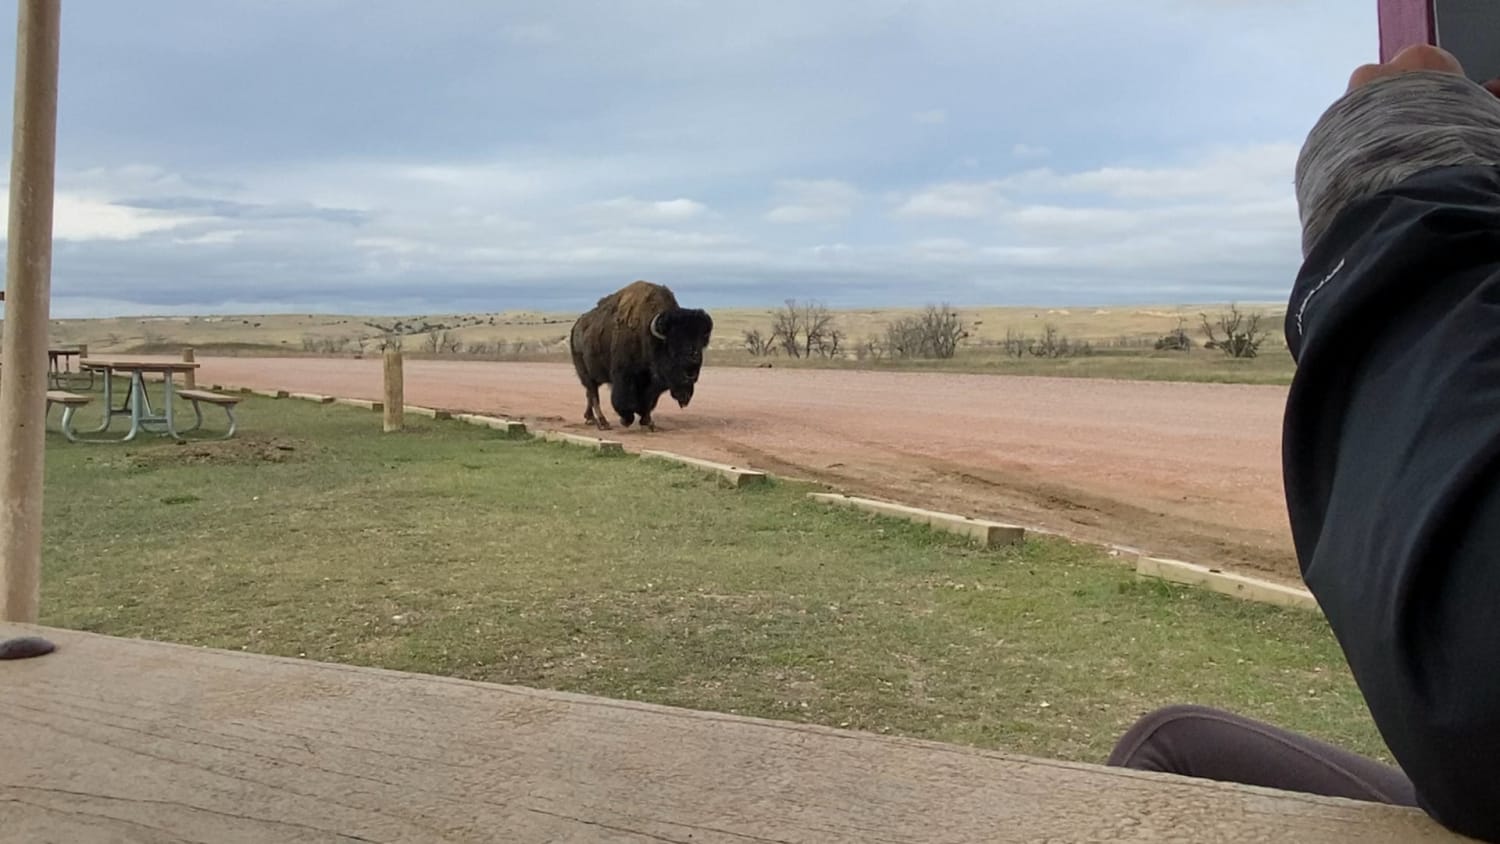 Close encounter with an absolute unit at Badlands National Park in South Dakota